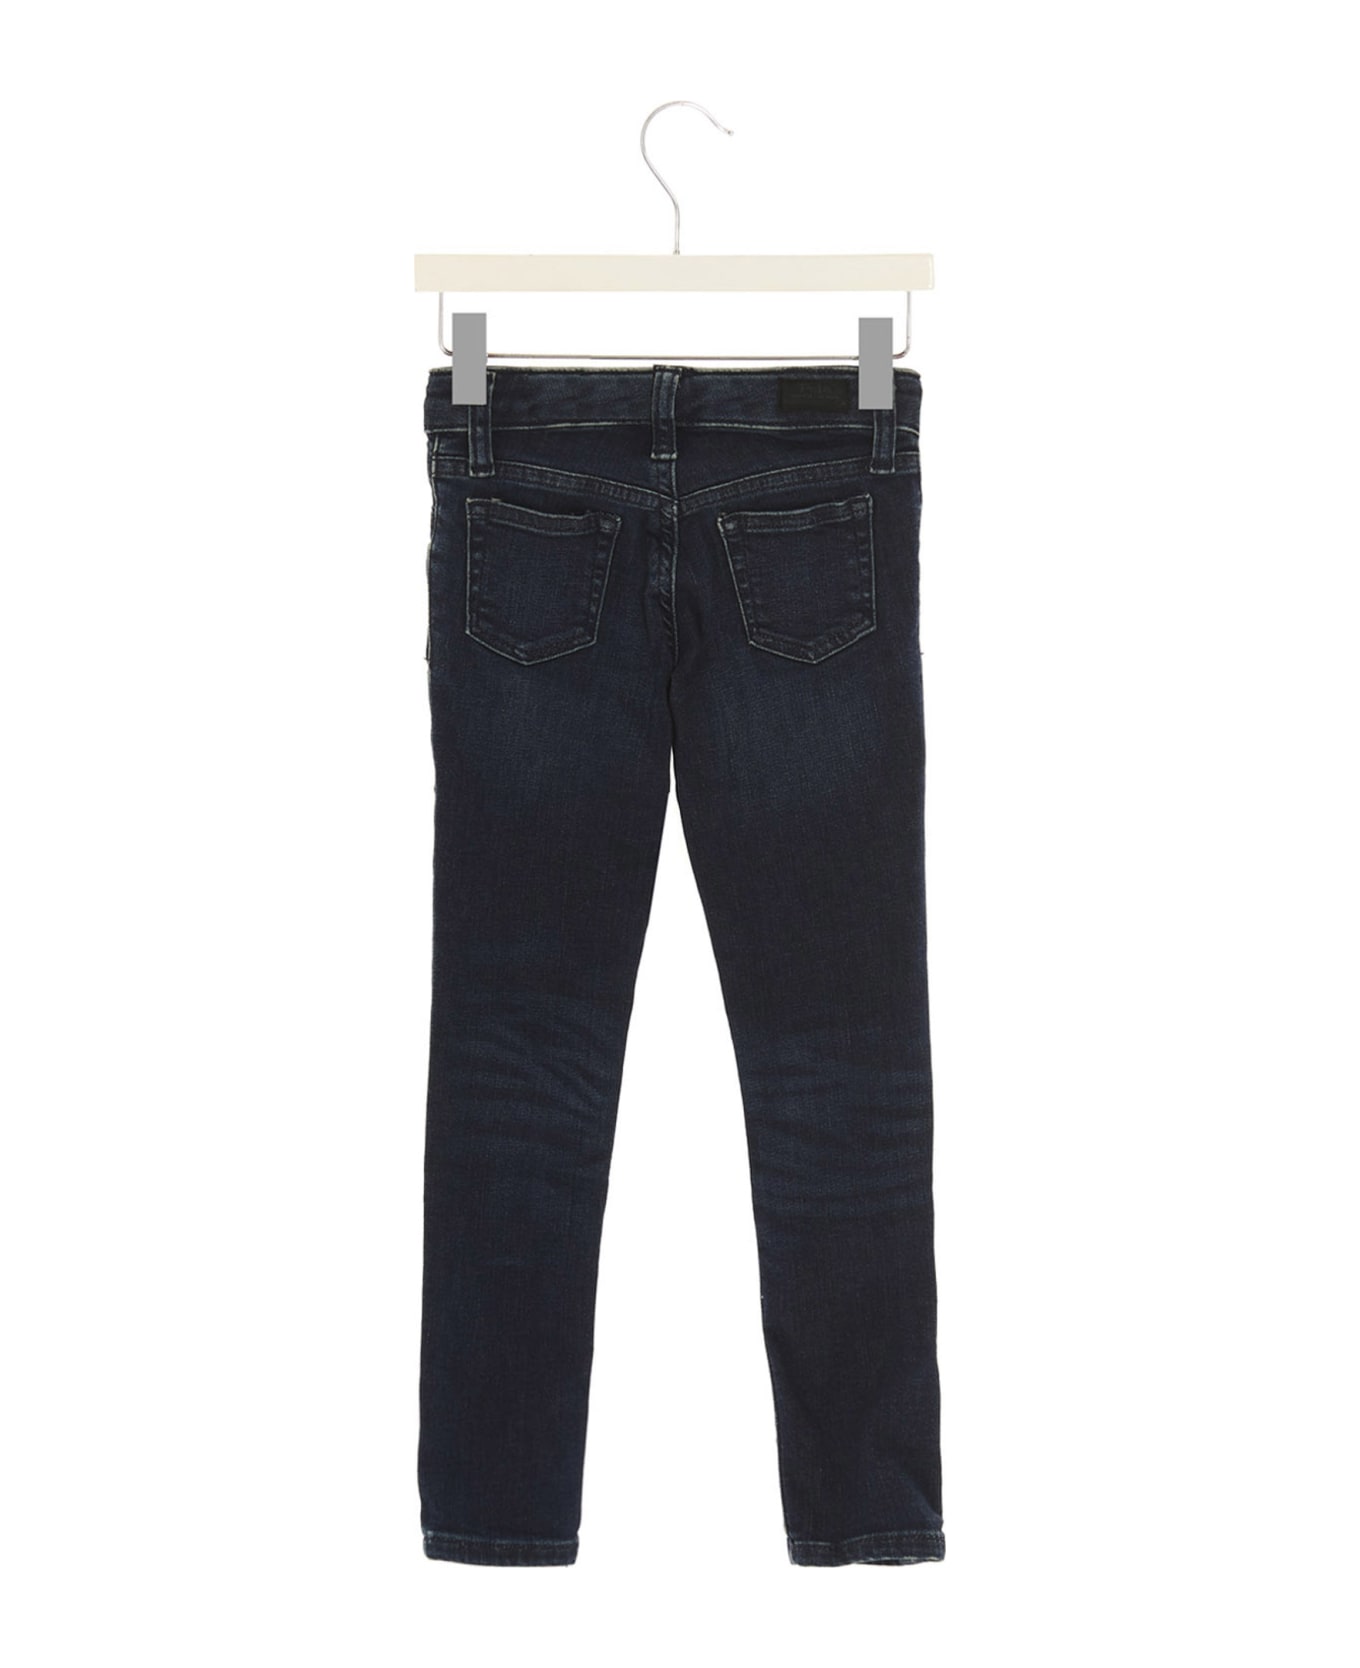 Polo Ralph Lauren 'aubrie' Jeans - Blue ボトムス